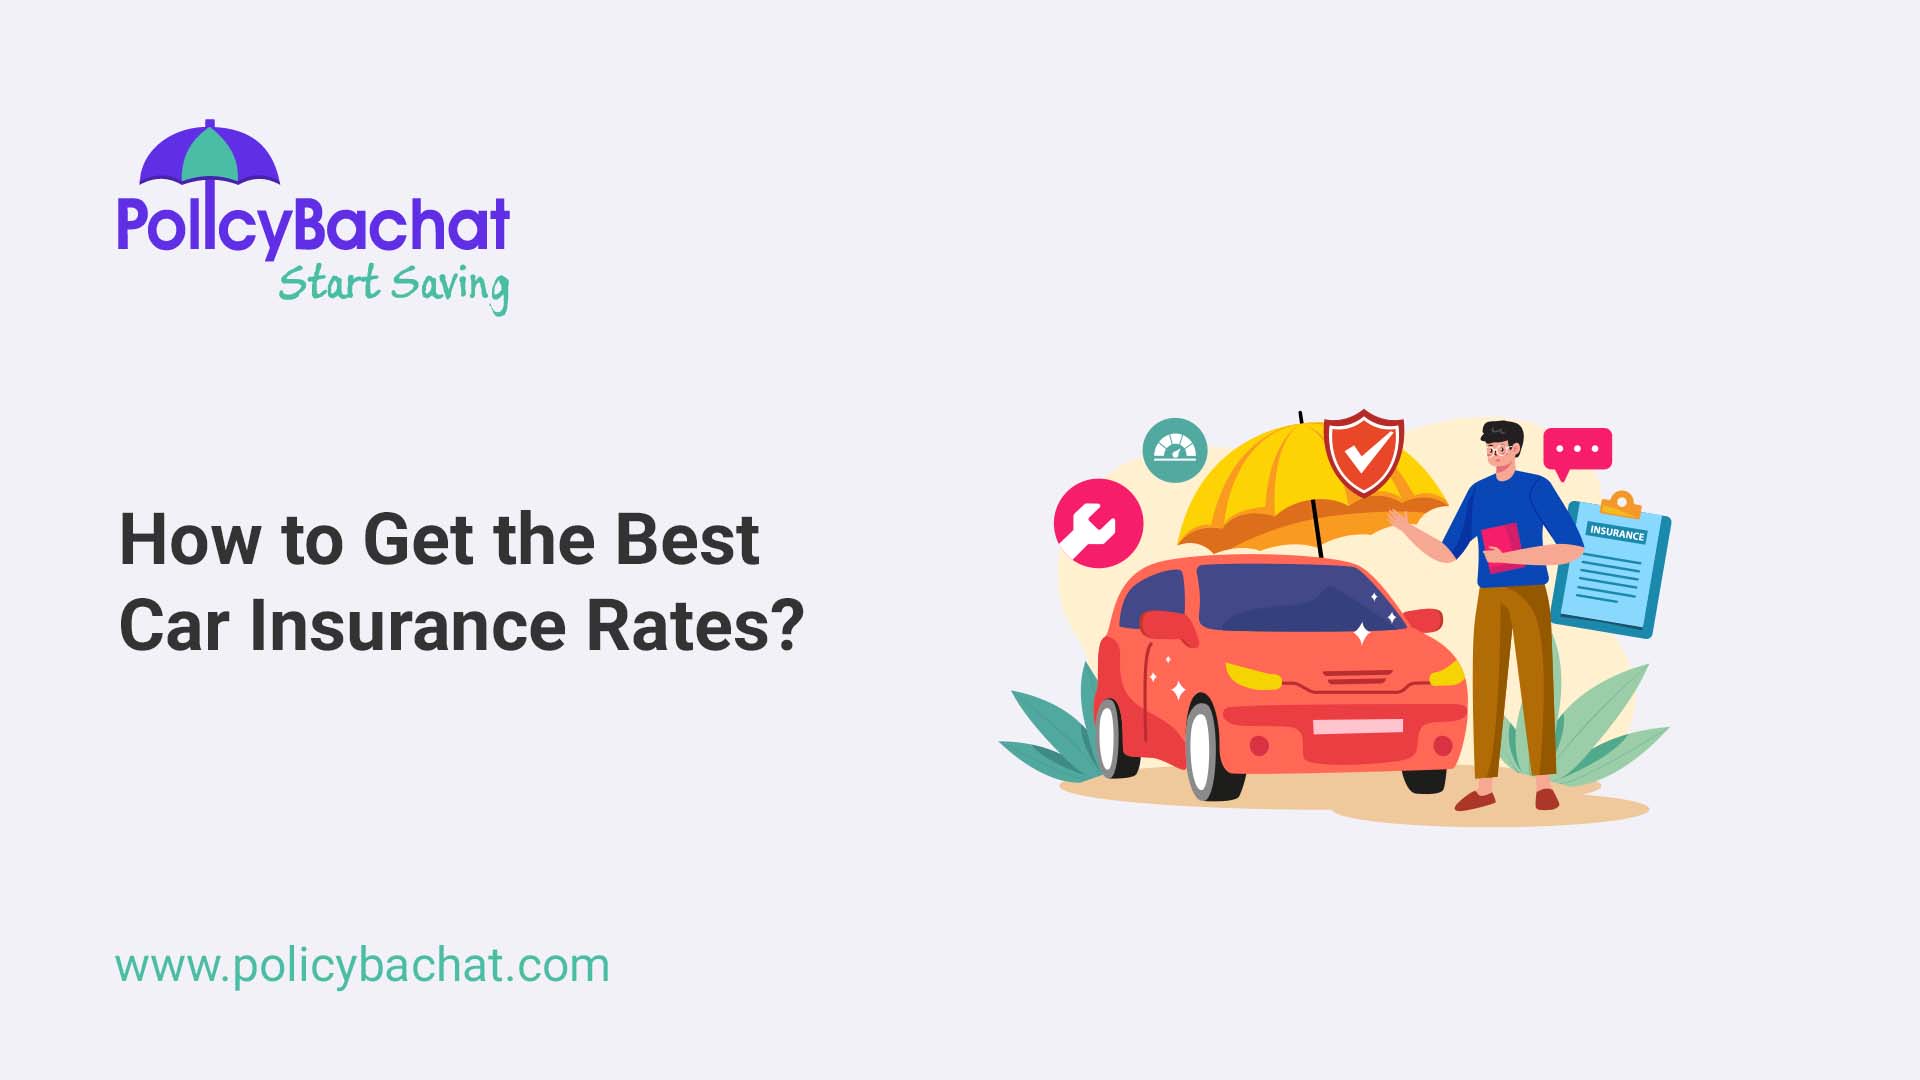 How to get the best car insurance rates? PolicyBachat